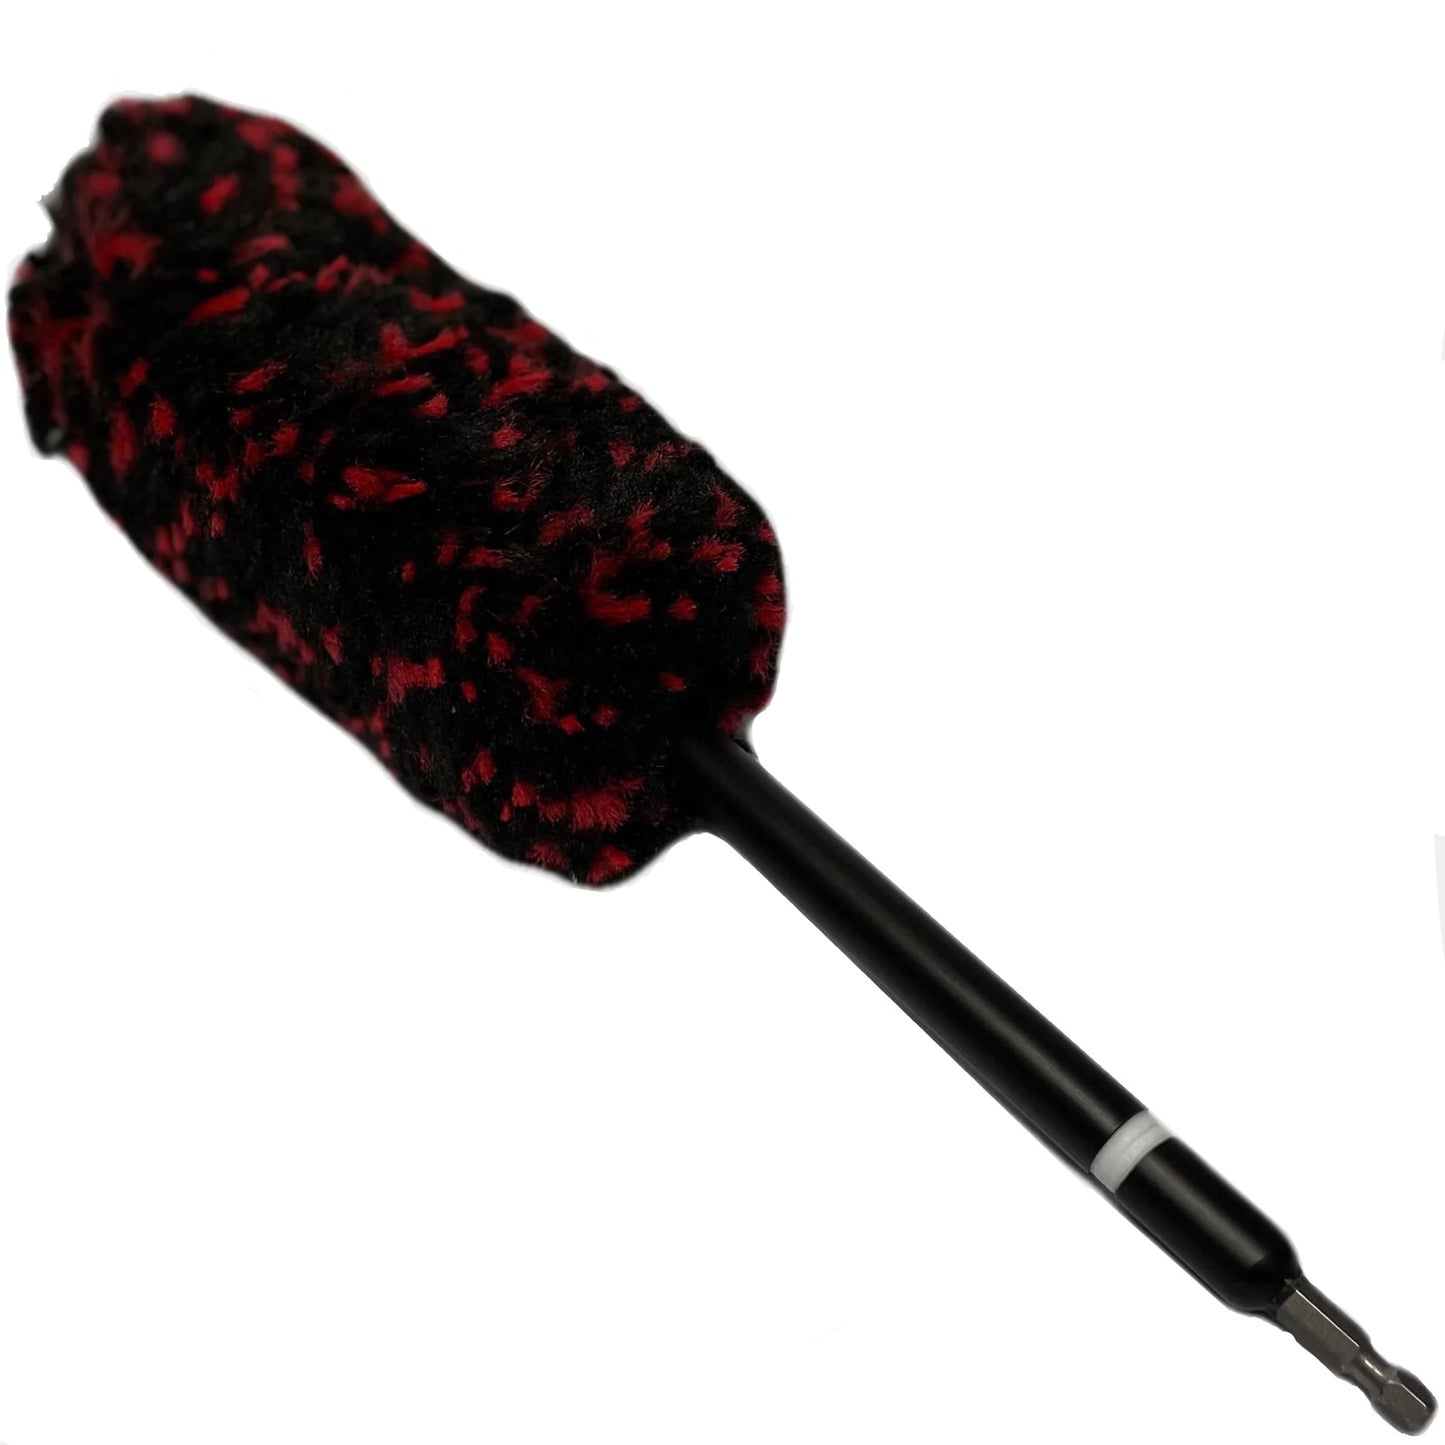 Wheel Woolie Power Woolie 12" with 1/4" Hex/ Central Grip Brush